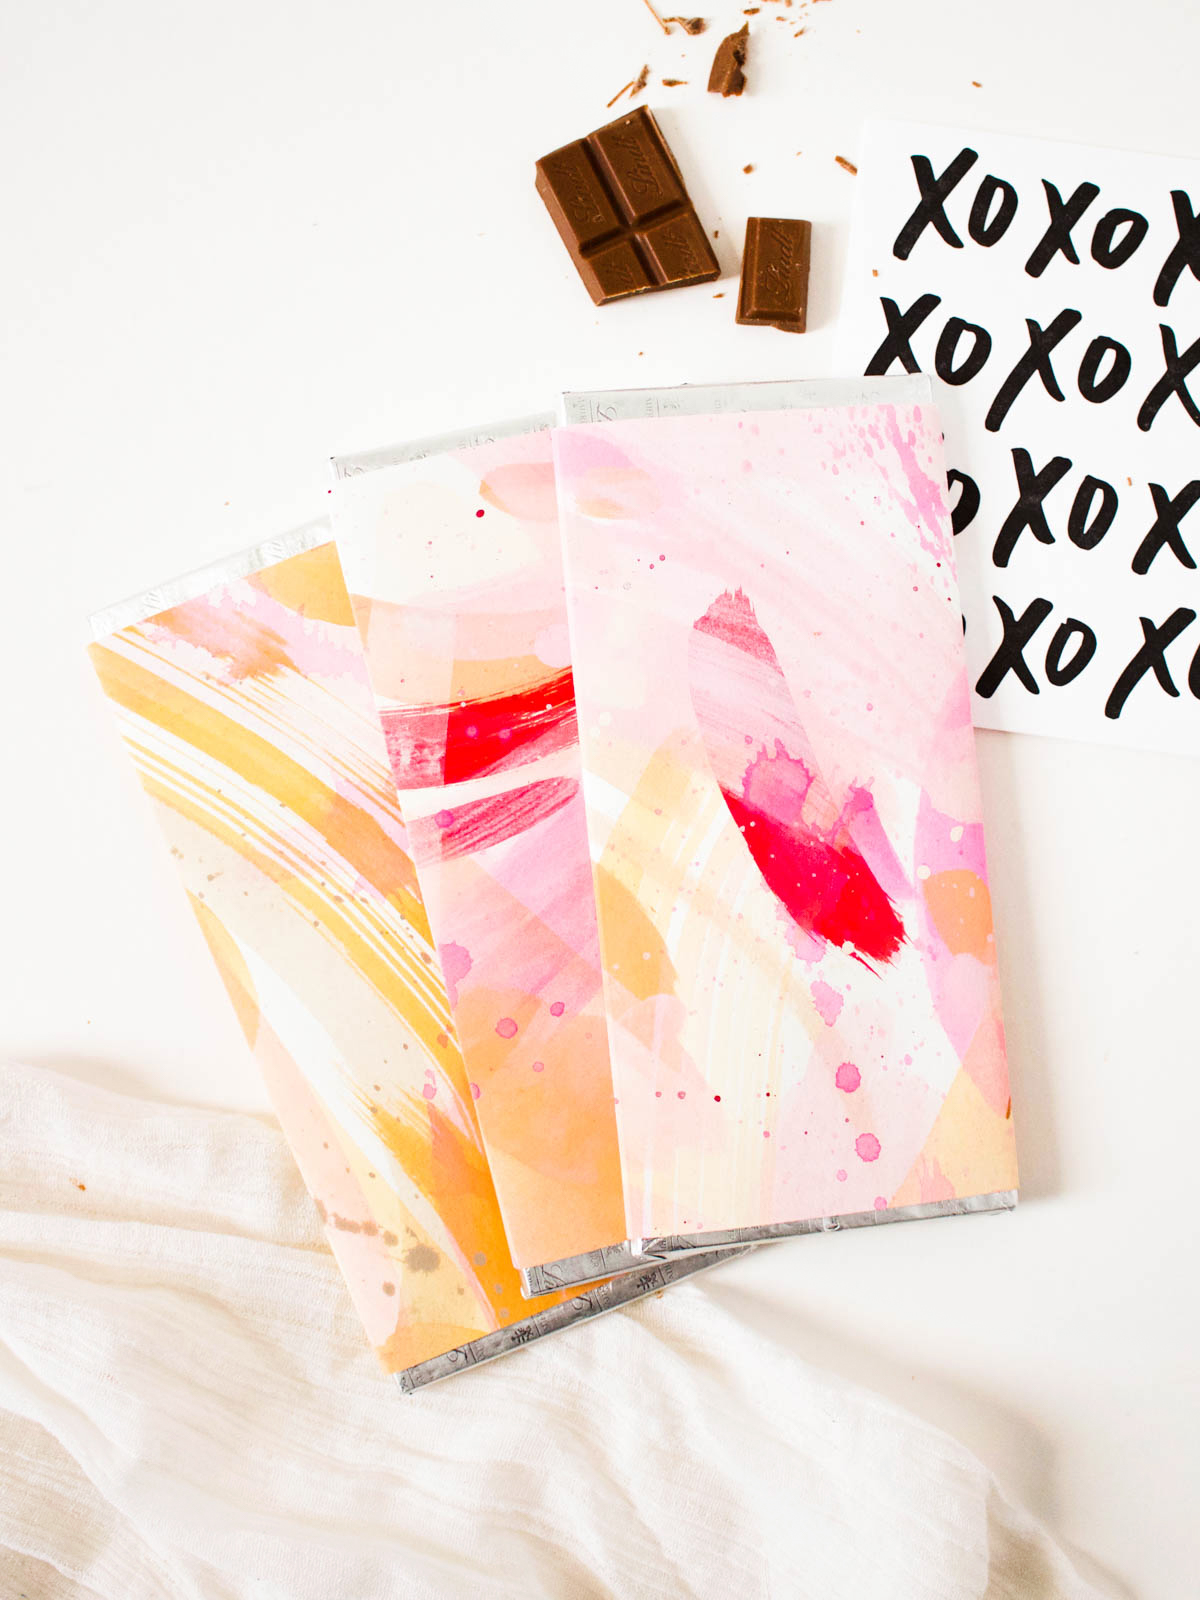 DIY Painted Chocolate Bars for Valentine's Day | Fish & Bull